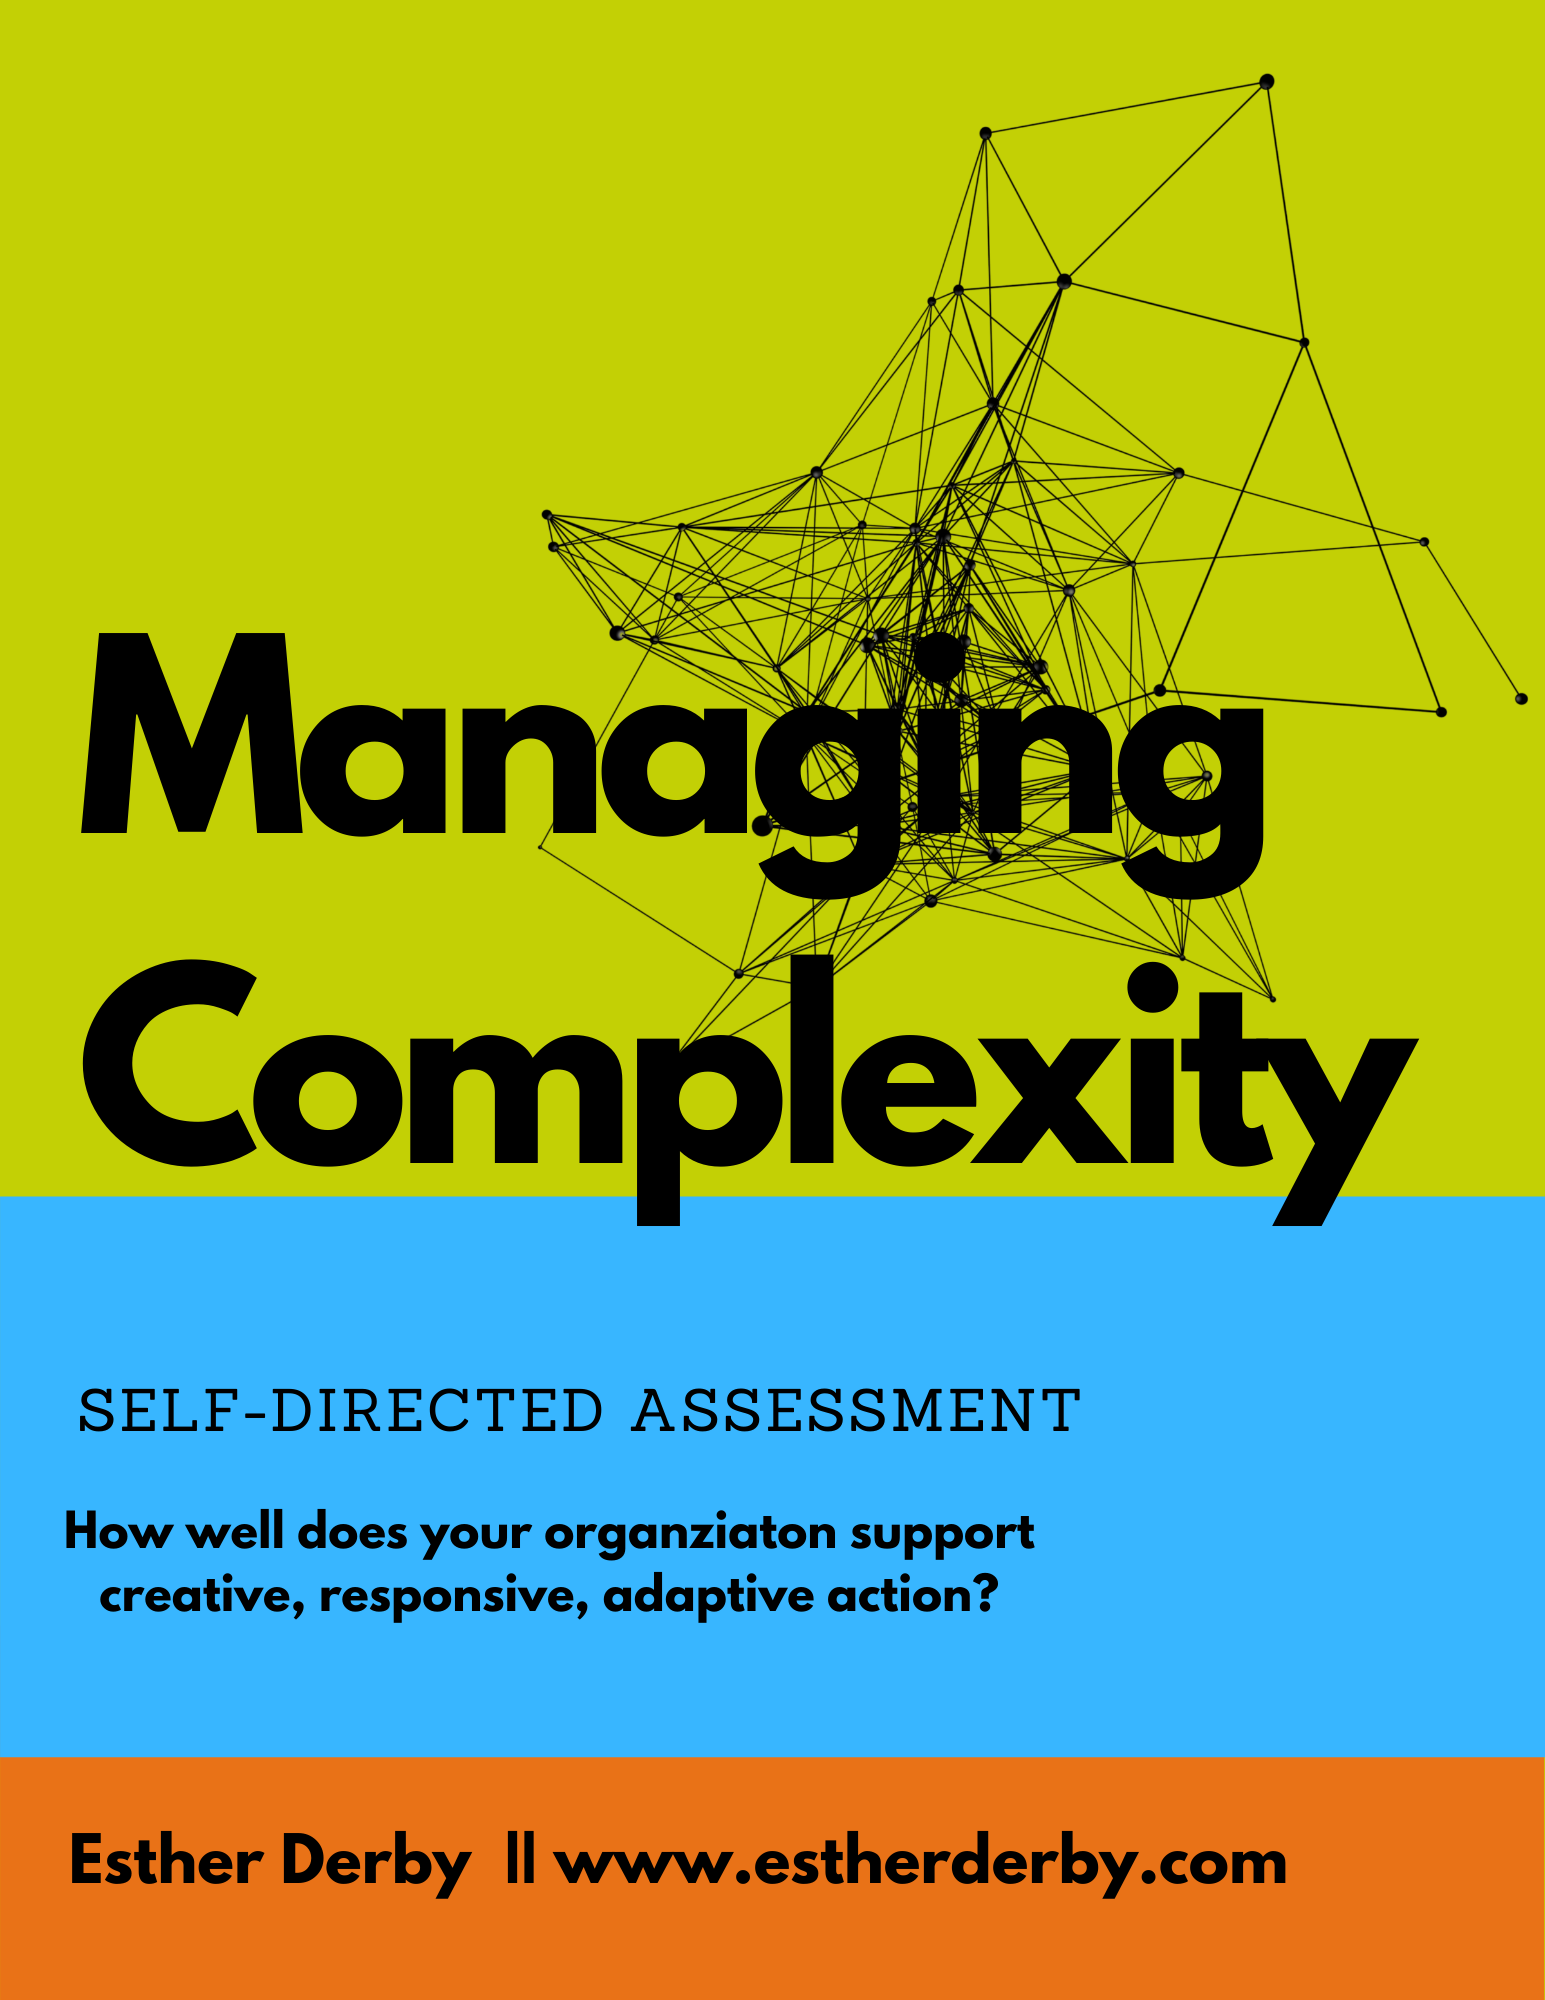 Managing Complexity Self-Directed Assessment